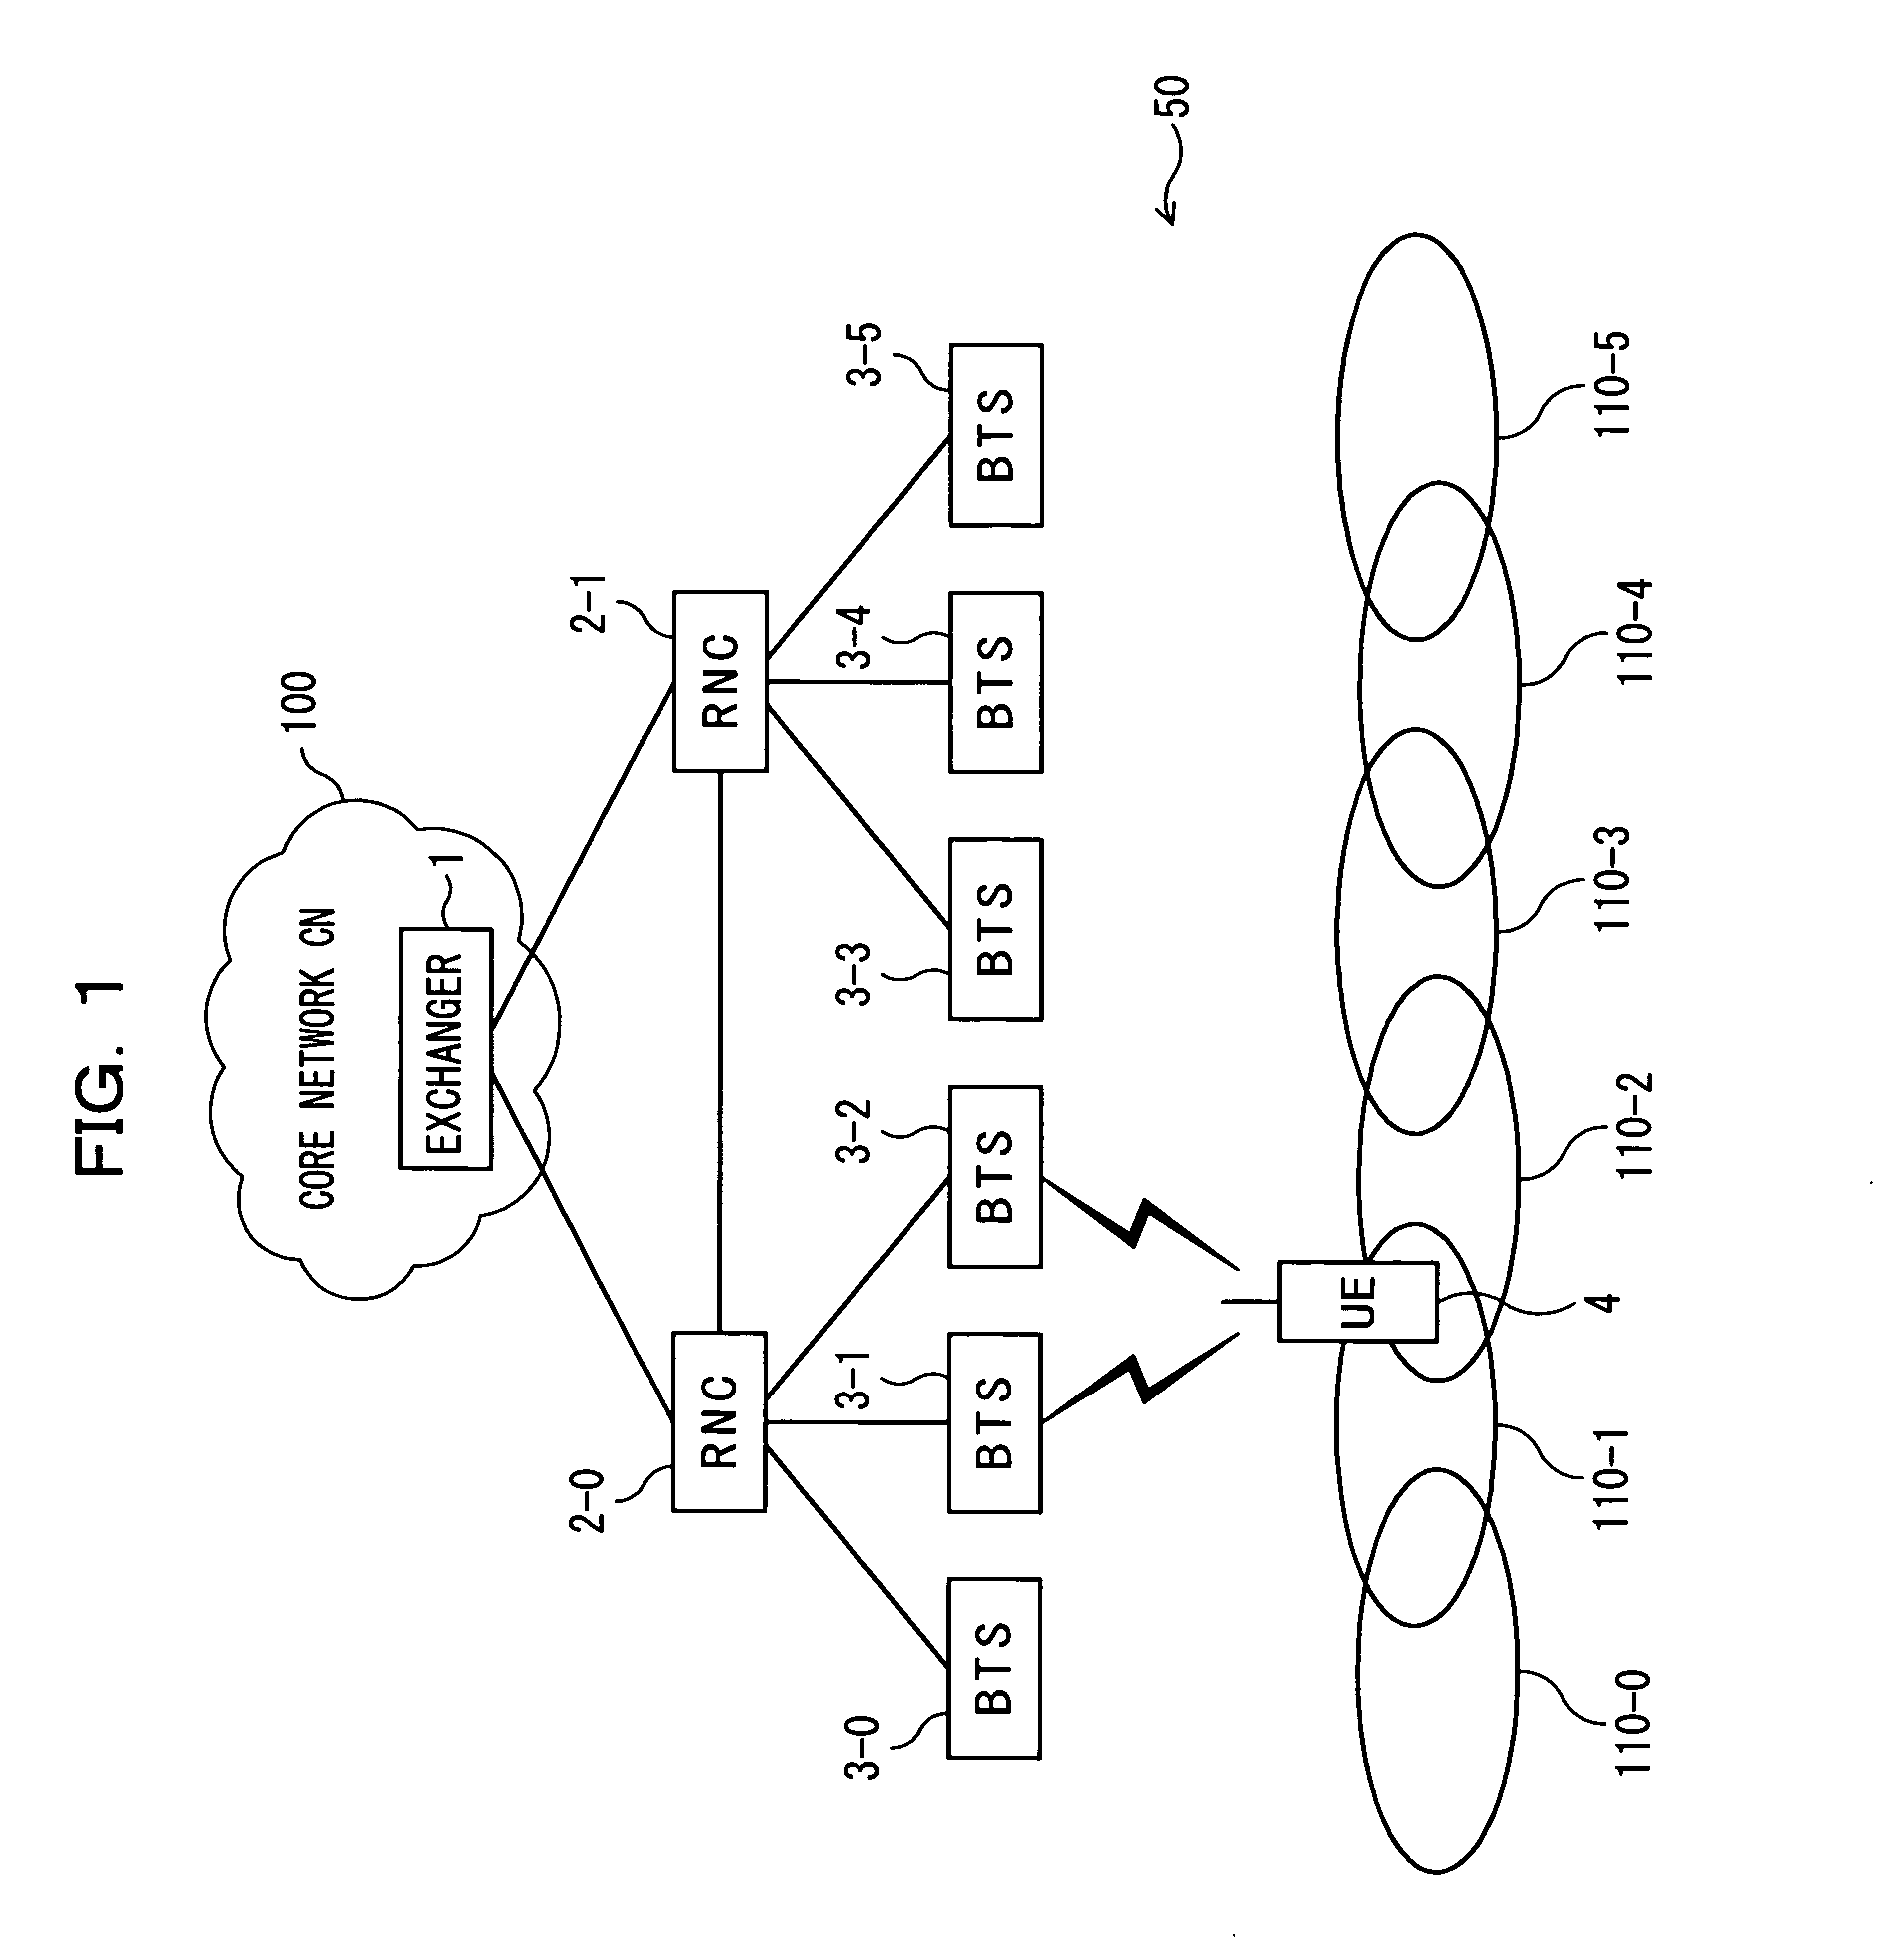 Packet transferring/transmitting method and mobile communication system